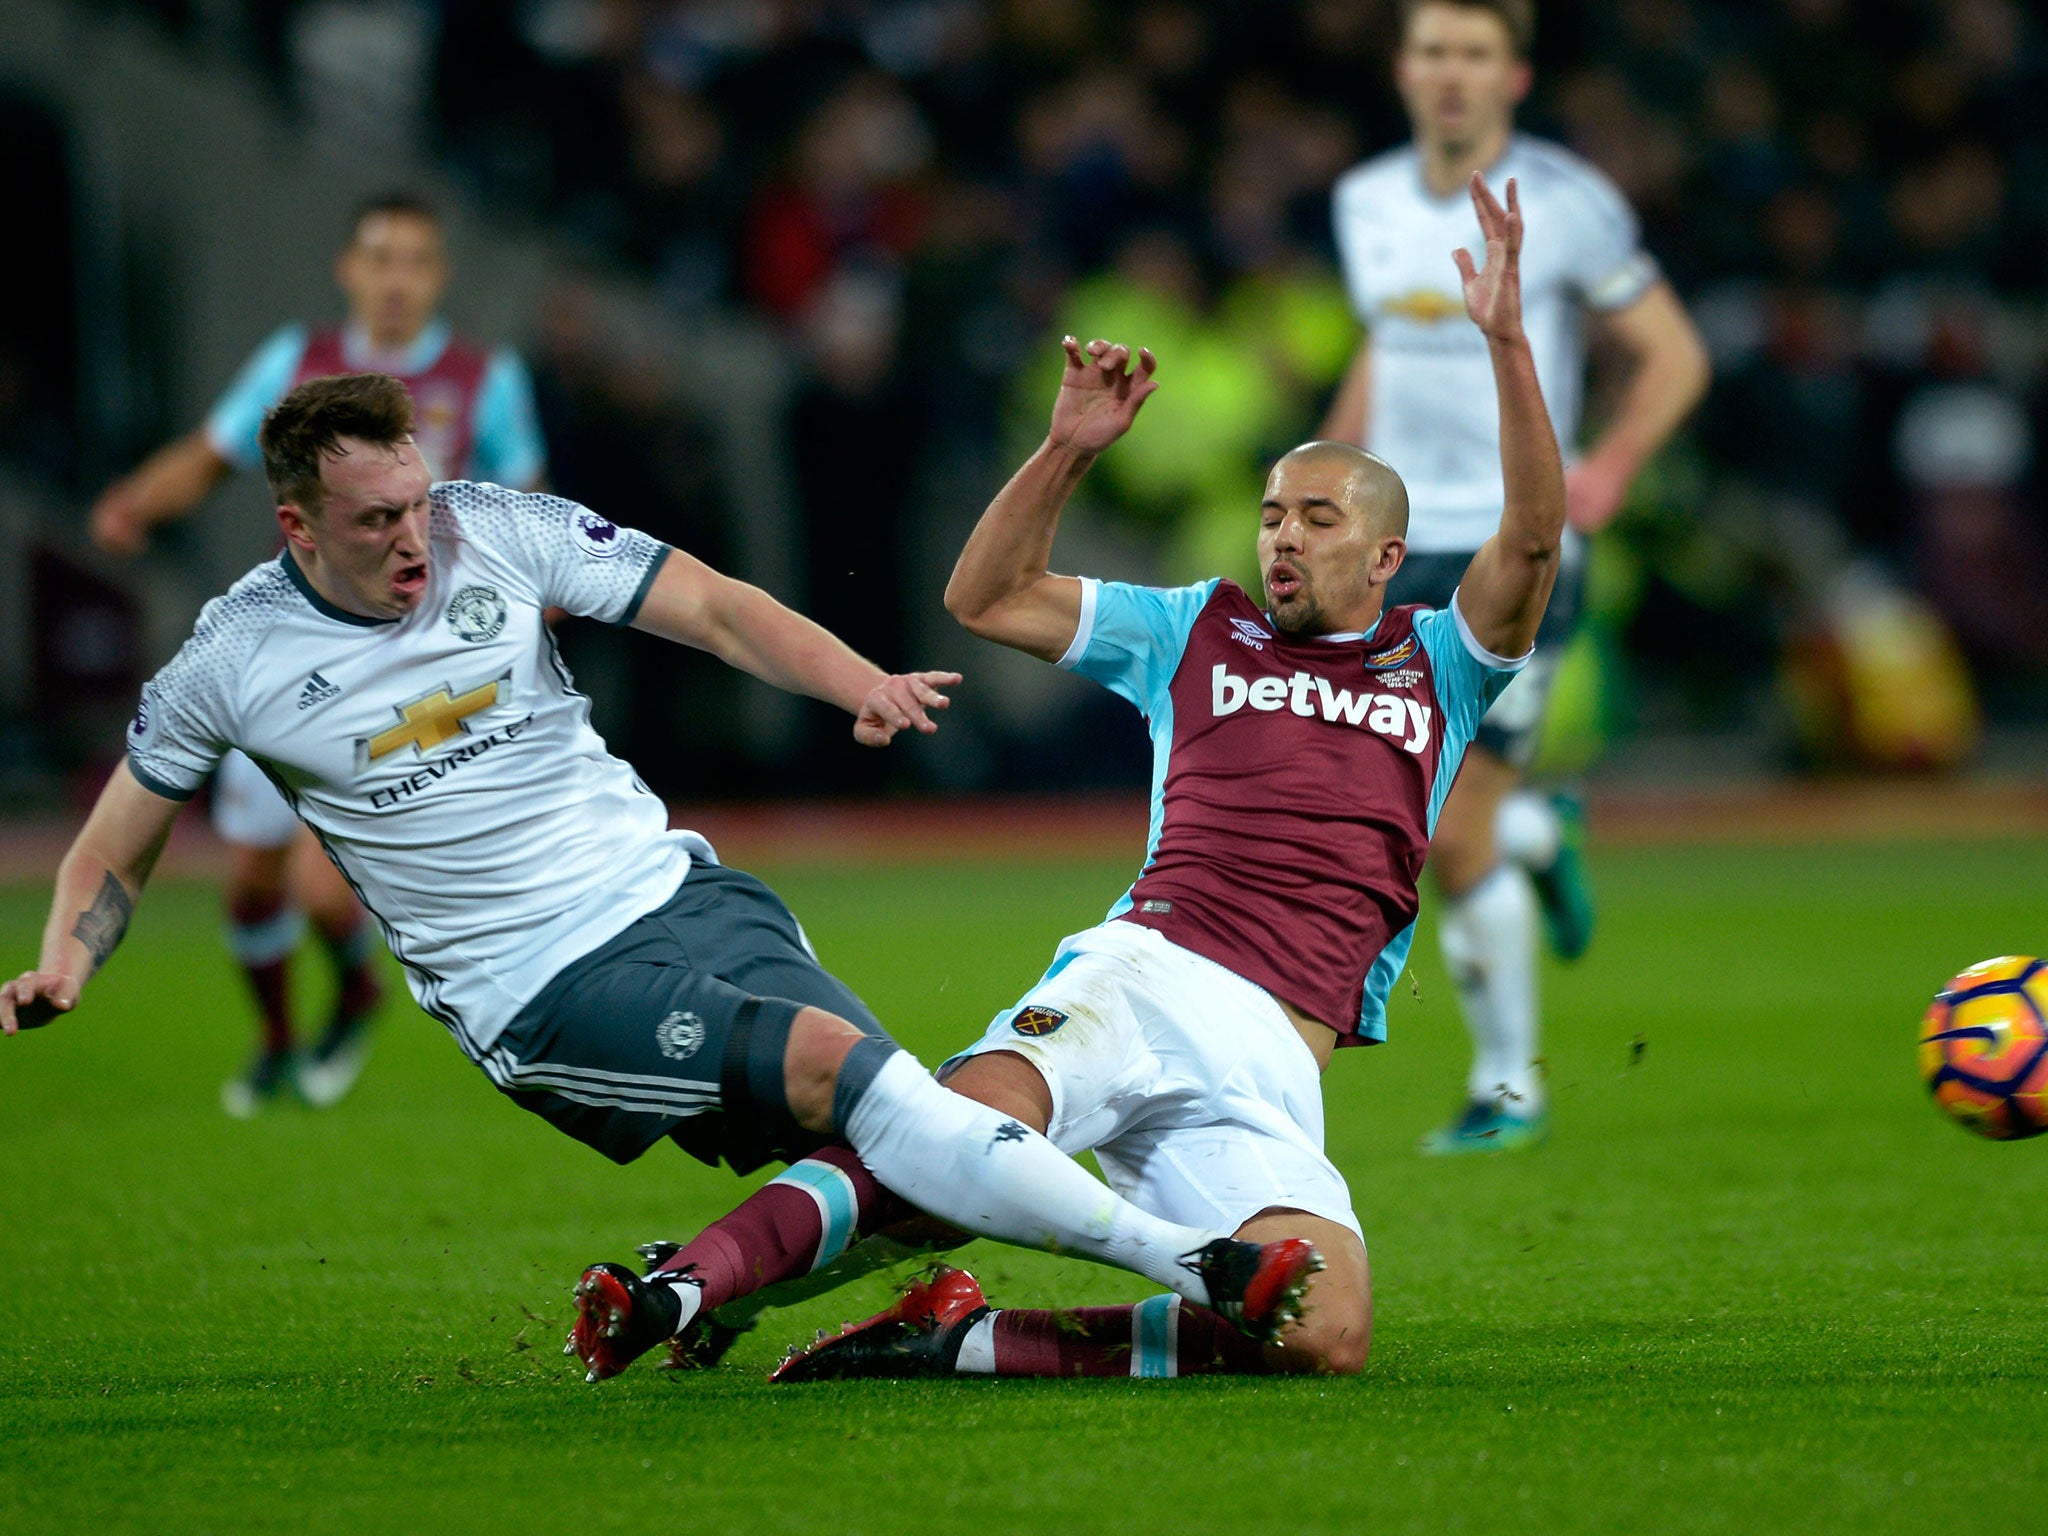 Sofiane Feghouli and Phil Jones put in a 50-50 challenge for the ball but it was Jones who reacted